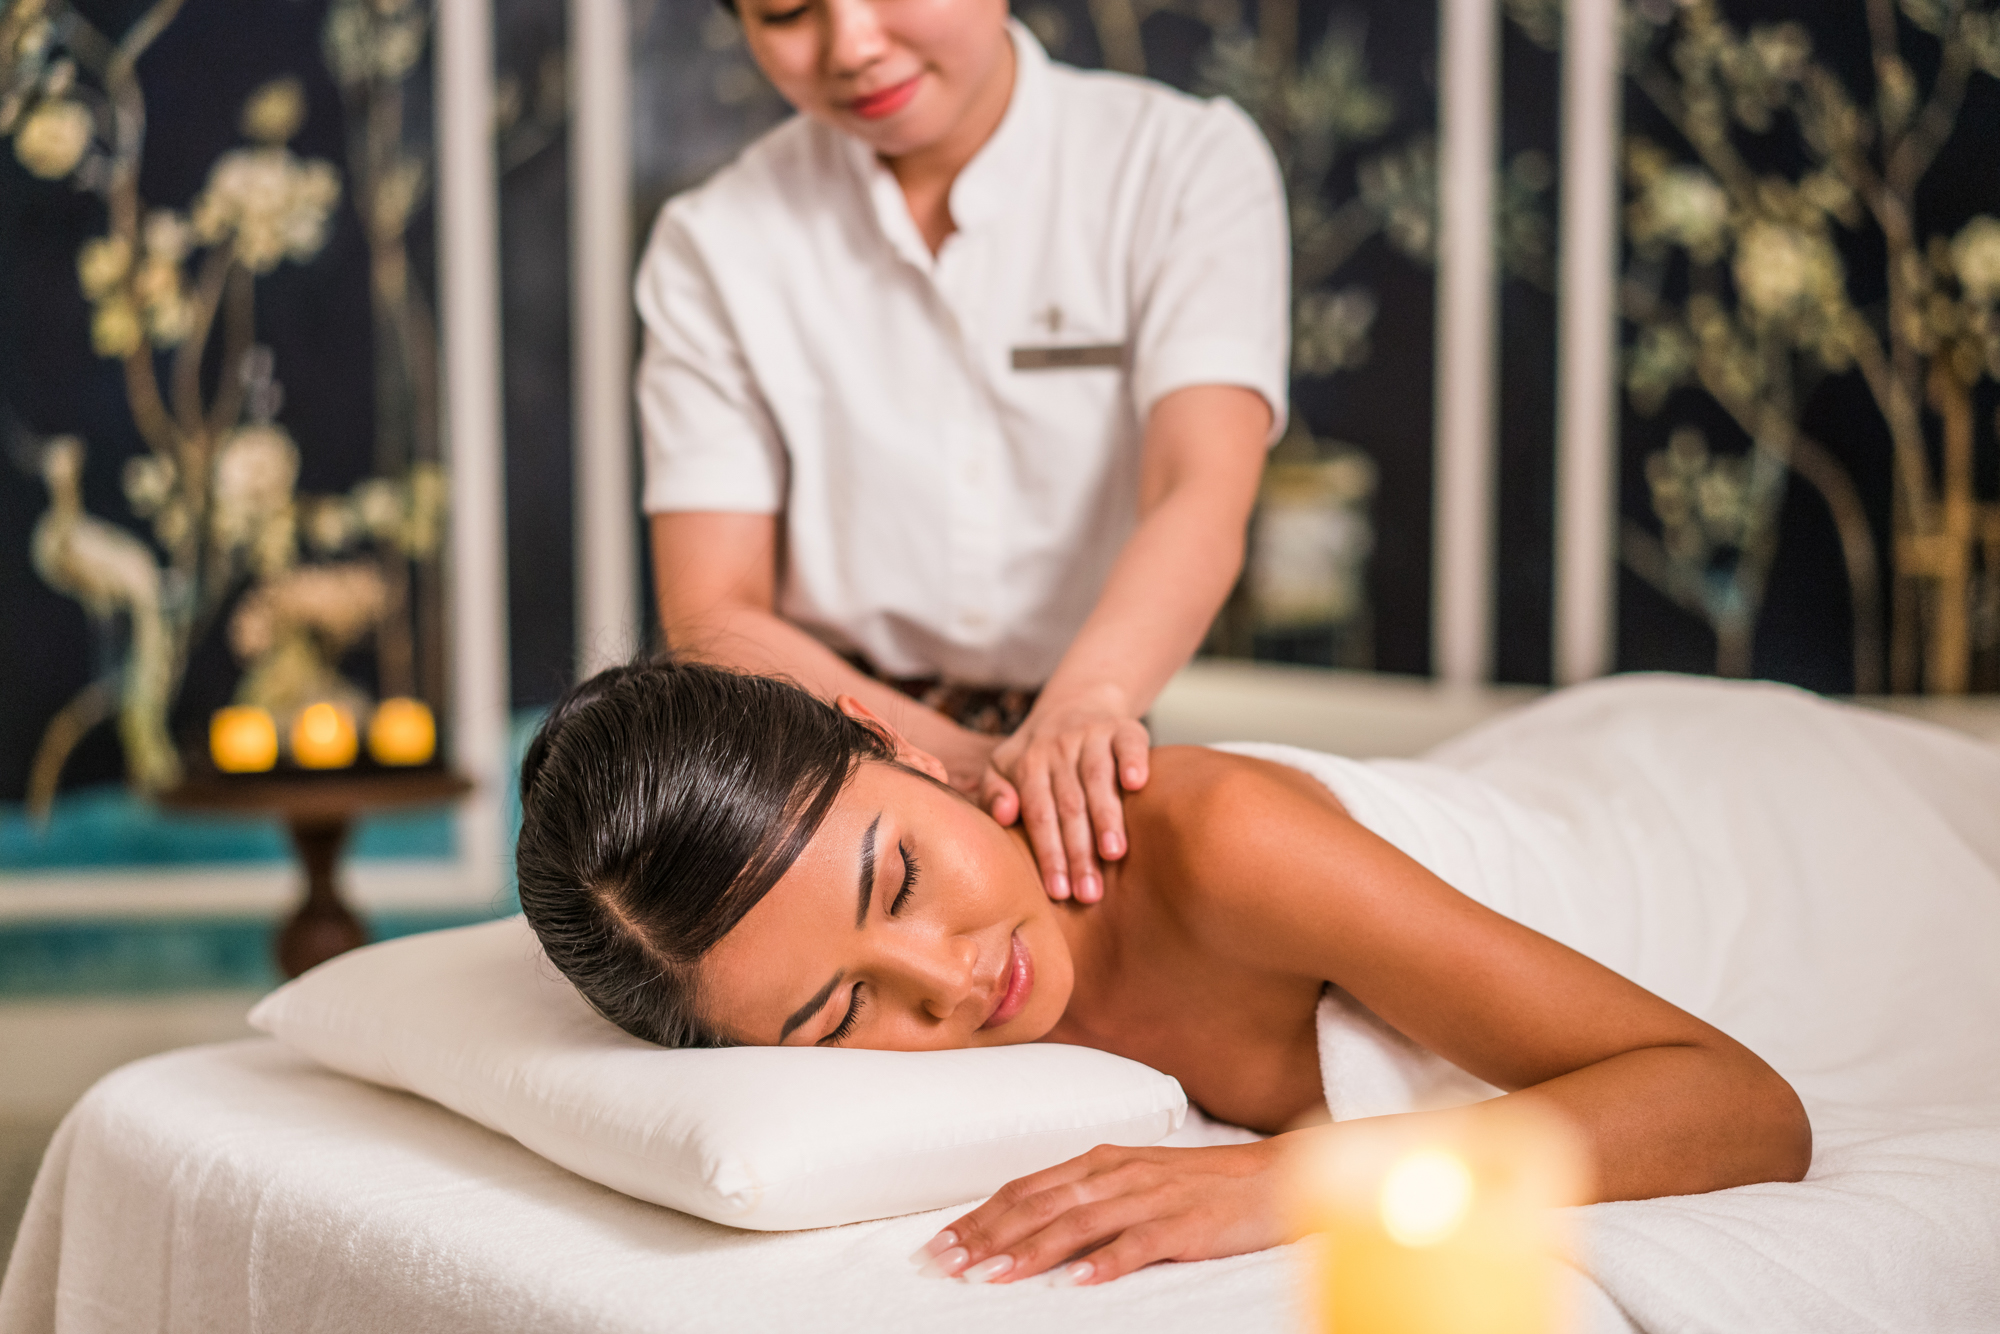 A woman receives a massage treatment at a luxury hotel in Vietnam